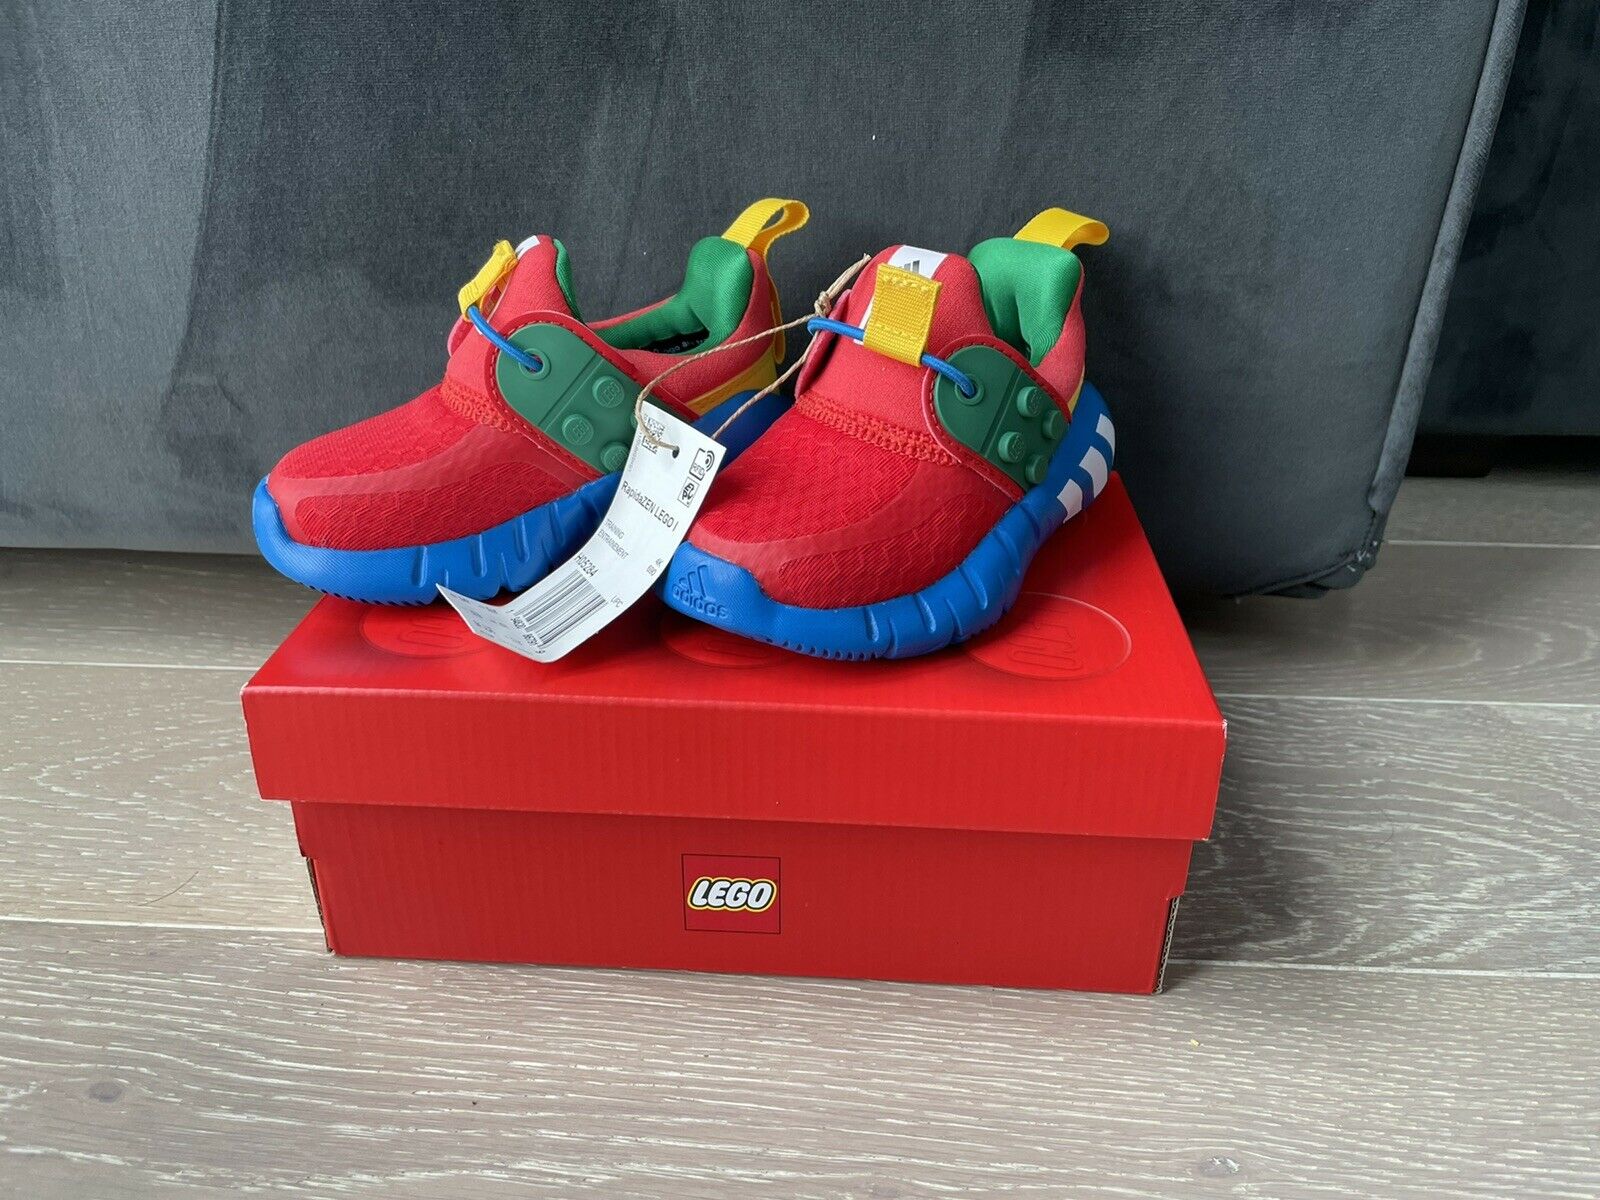 ADIDAS RAPIDAZEN X LEGO® SHOES *BRAND NEW* Size 5K Infant/Toddler *SOLD OUT*